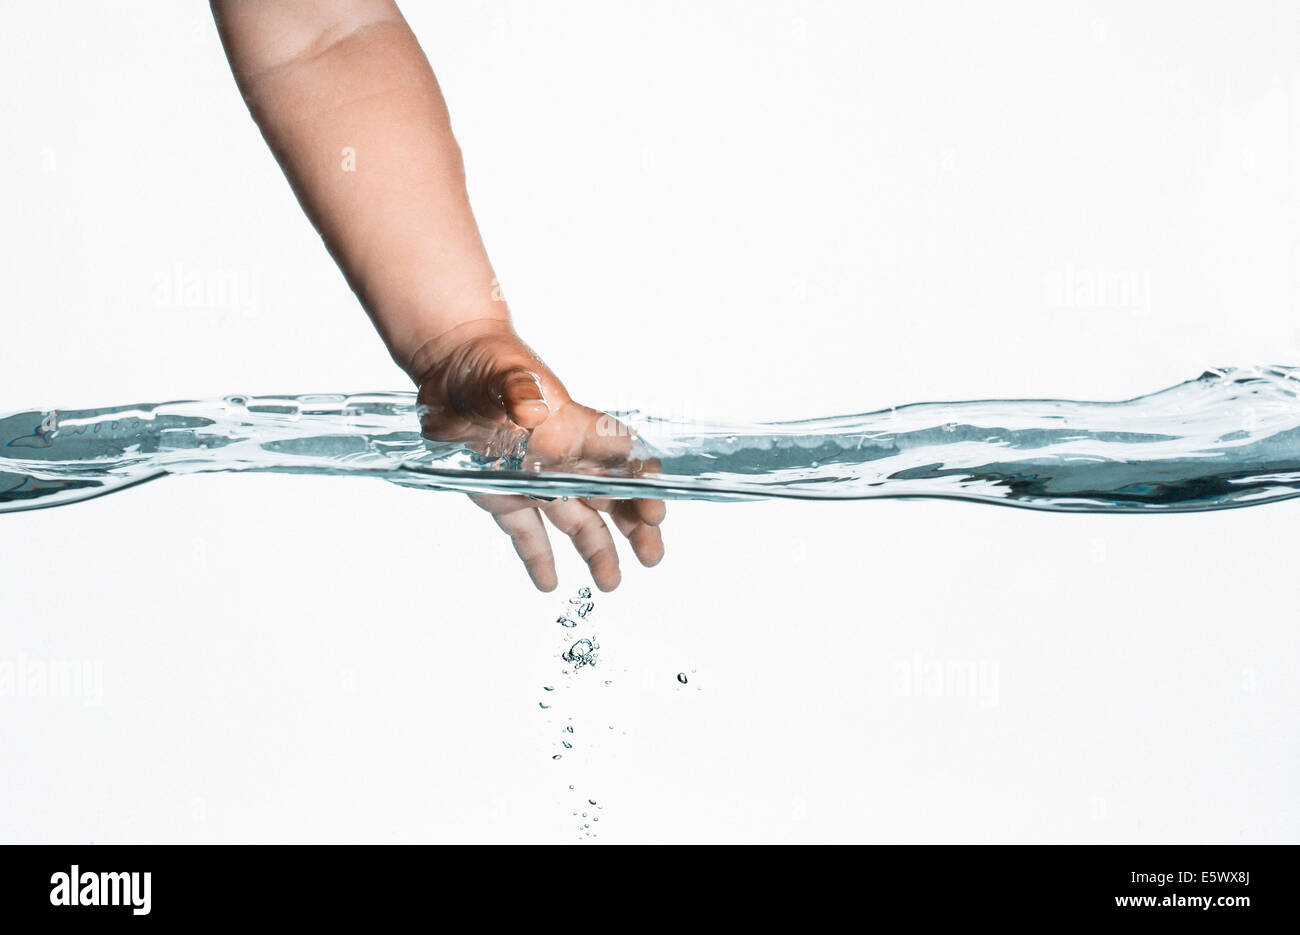 Surface level view of toddlers hand reaching into clear water Stock Photo